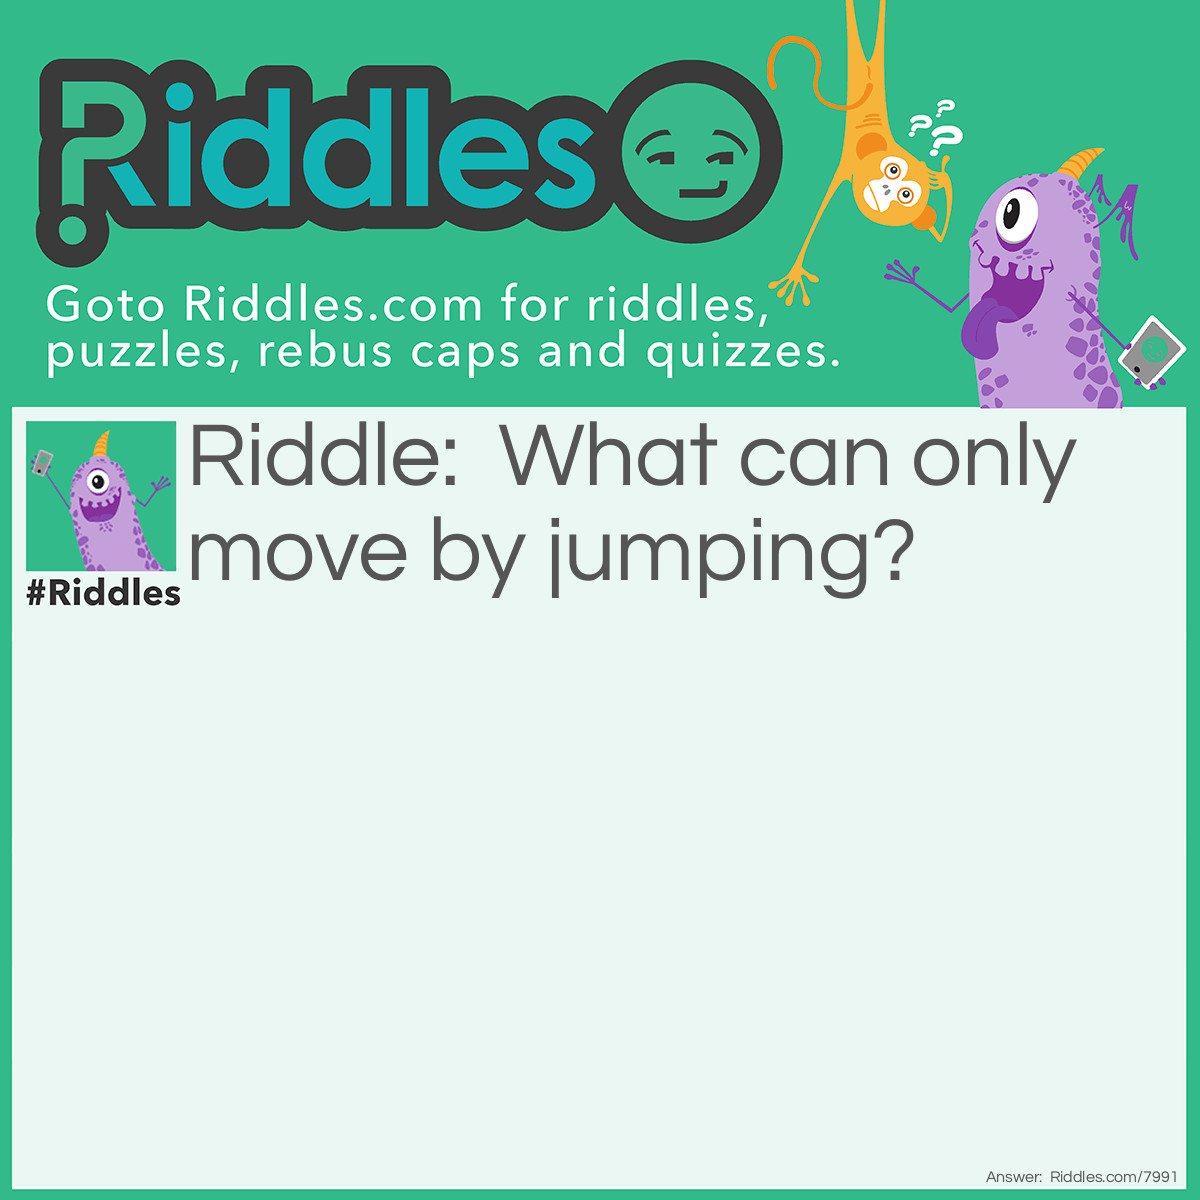 Riddle: What can only move by jumping? Answer: The Knight chess piece.